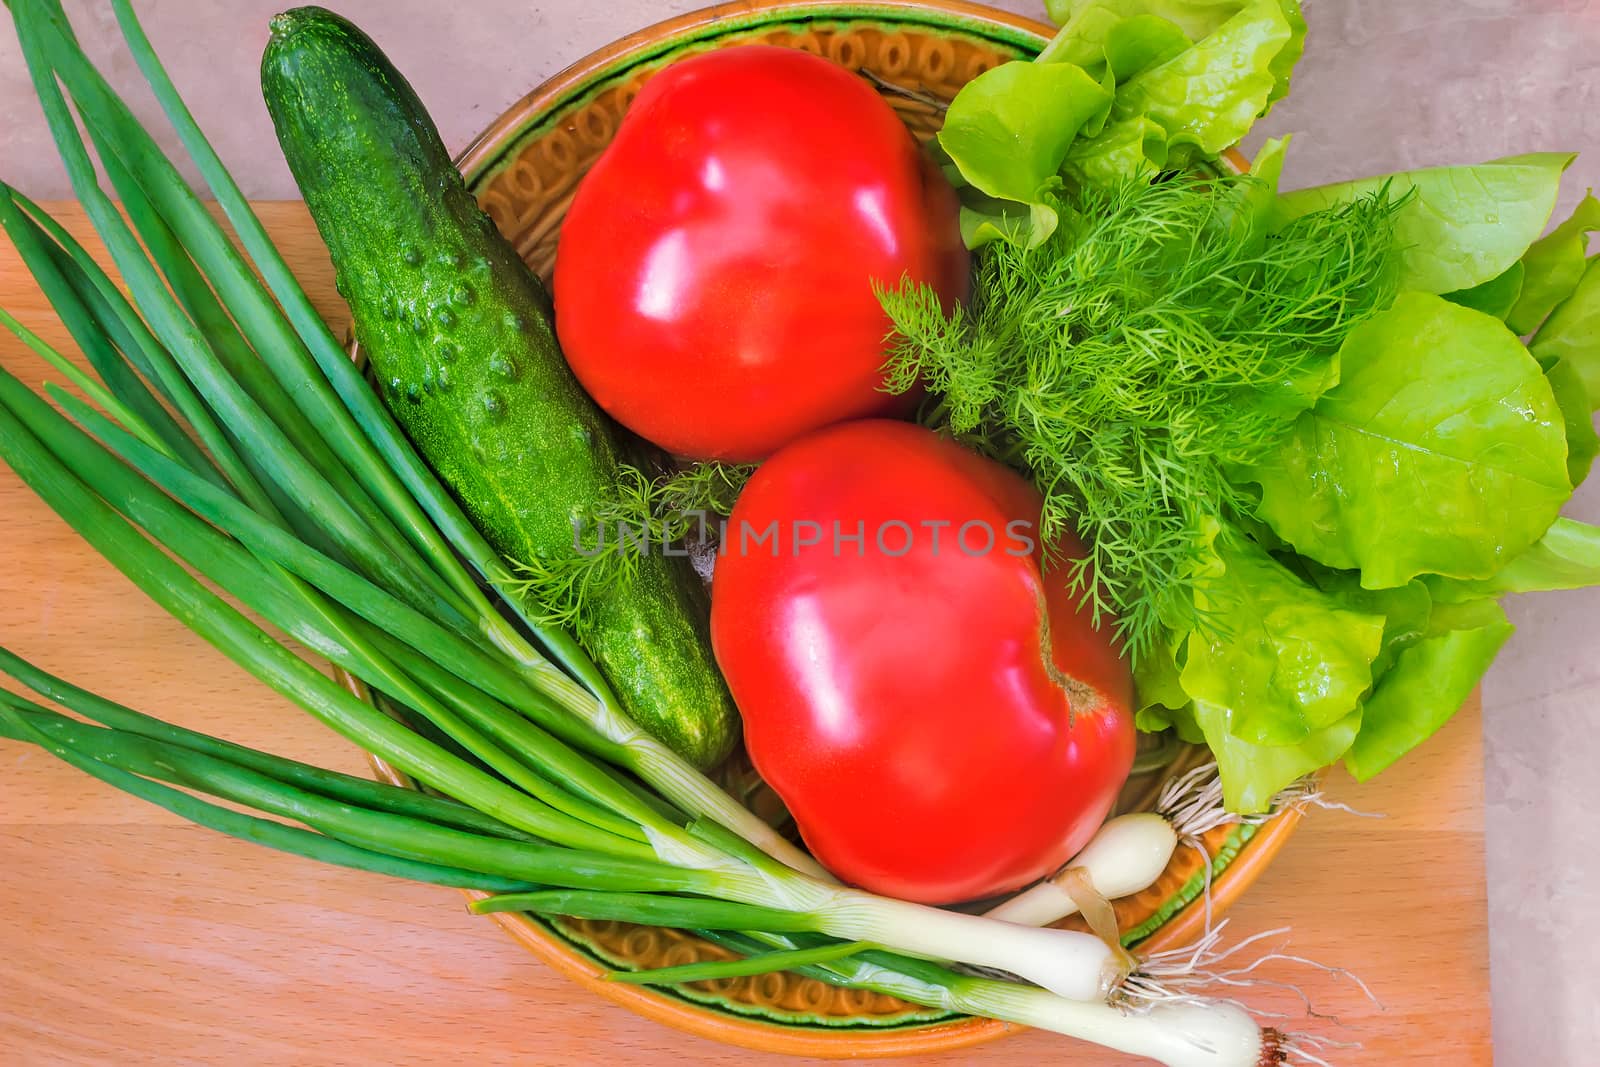 On a ceramic dish are large ripe tomatoes, cucumber, green onions, lettuce. Presents closeup.